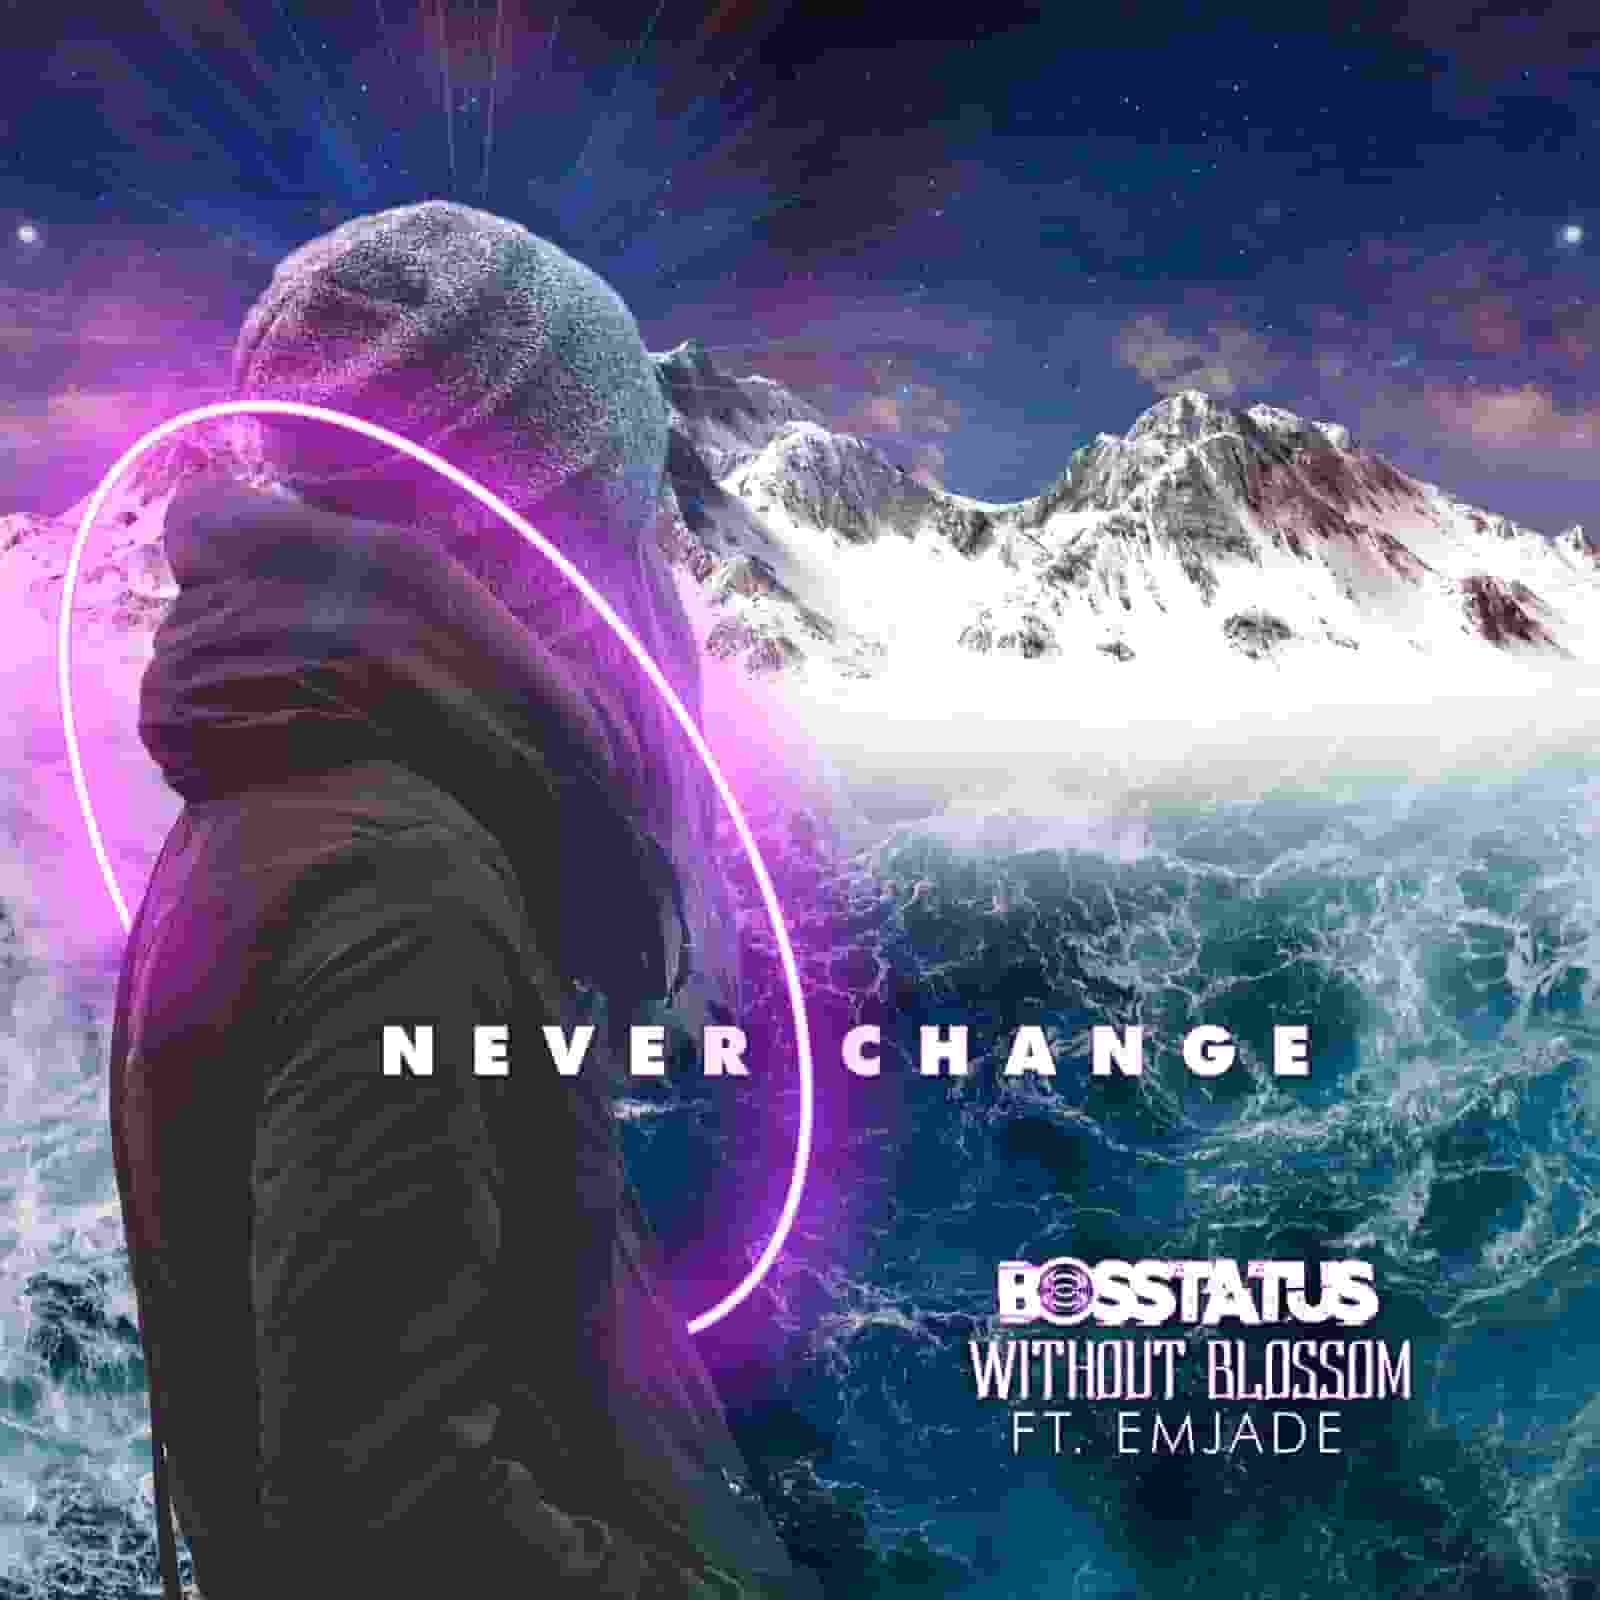 Music Review: Never Change (ft. Emjade) by Bosstatus & Without Blossom Cover image